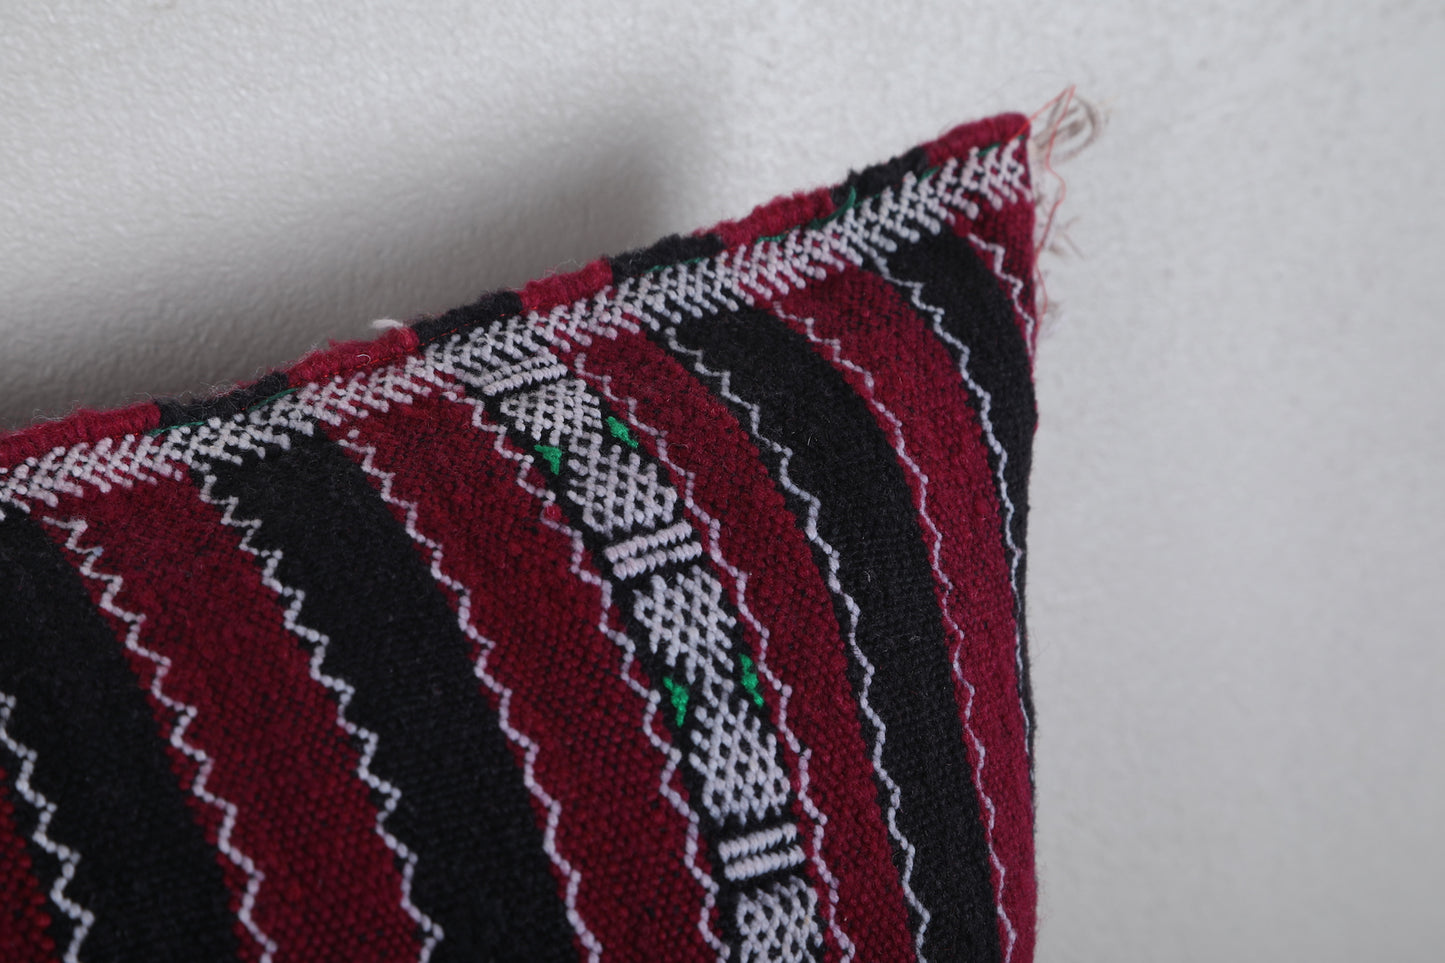 Vintage Moroccan Kilim Pillow 17.3 INCHES X 22 INCHES